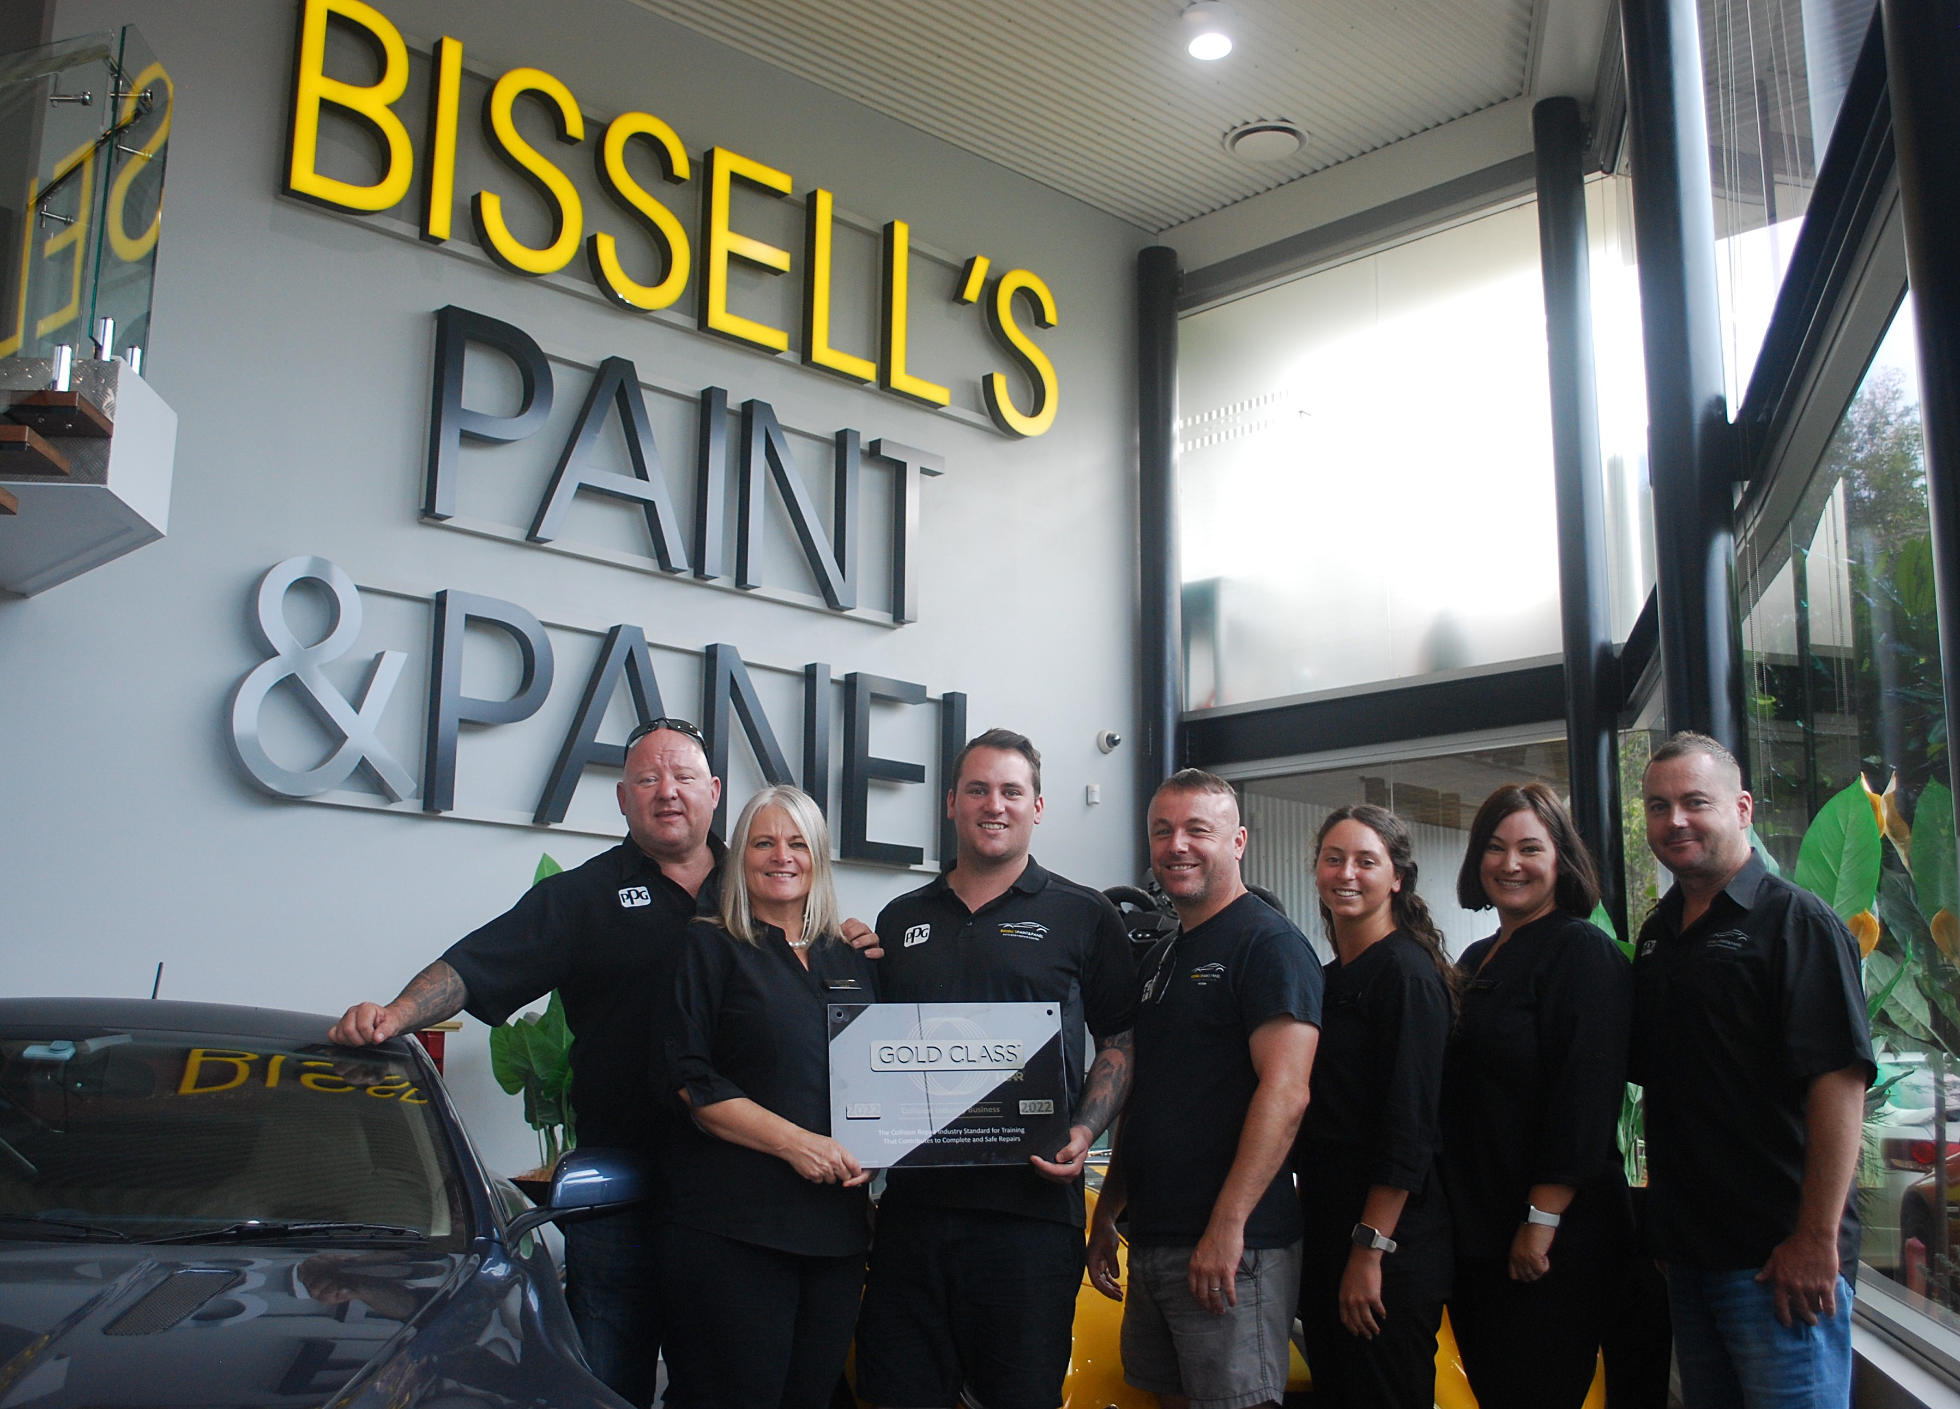 I-CAR Awards Gold Class To Bissell’s Paint & Panel